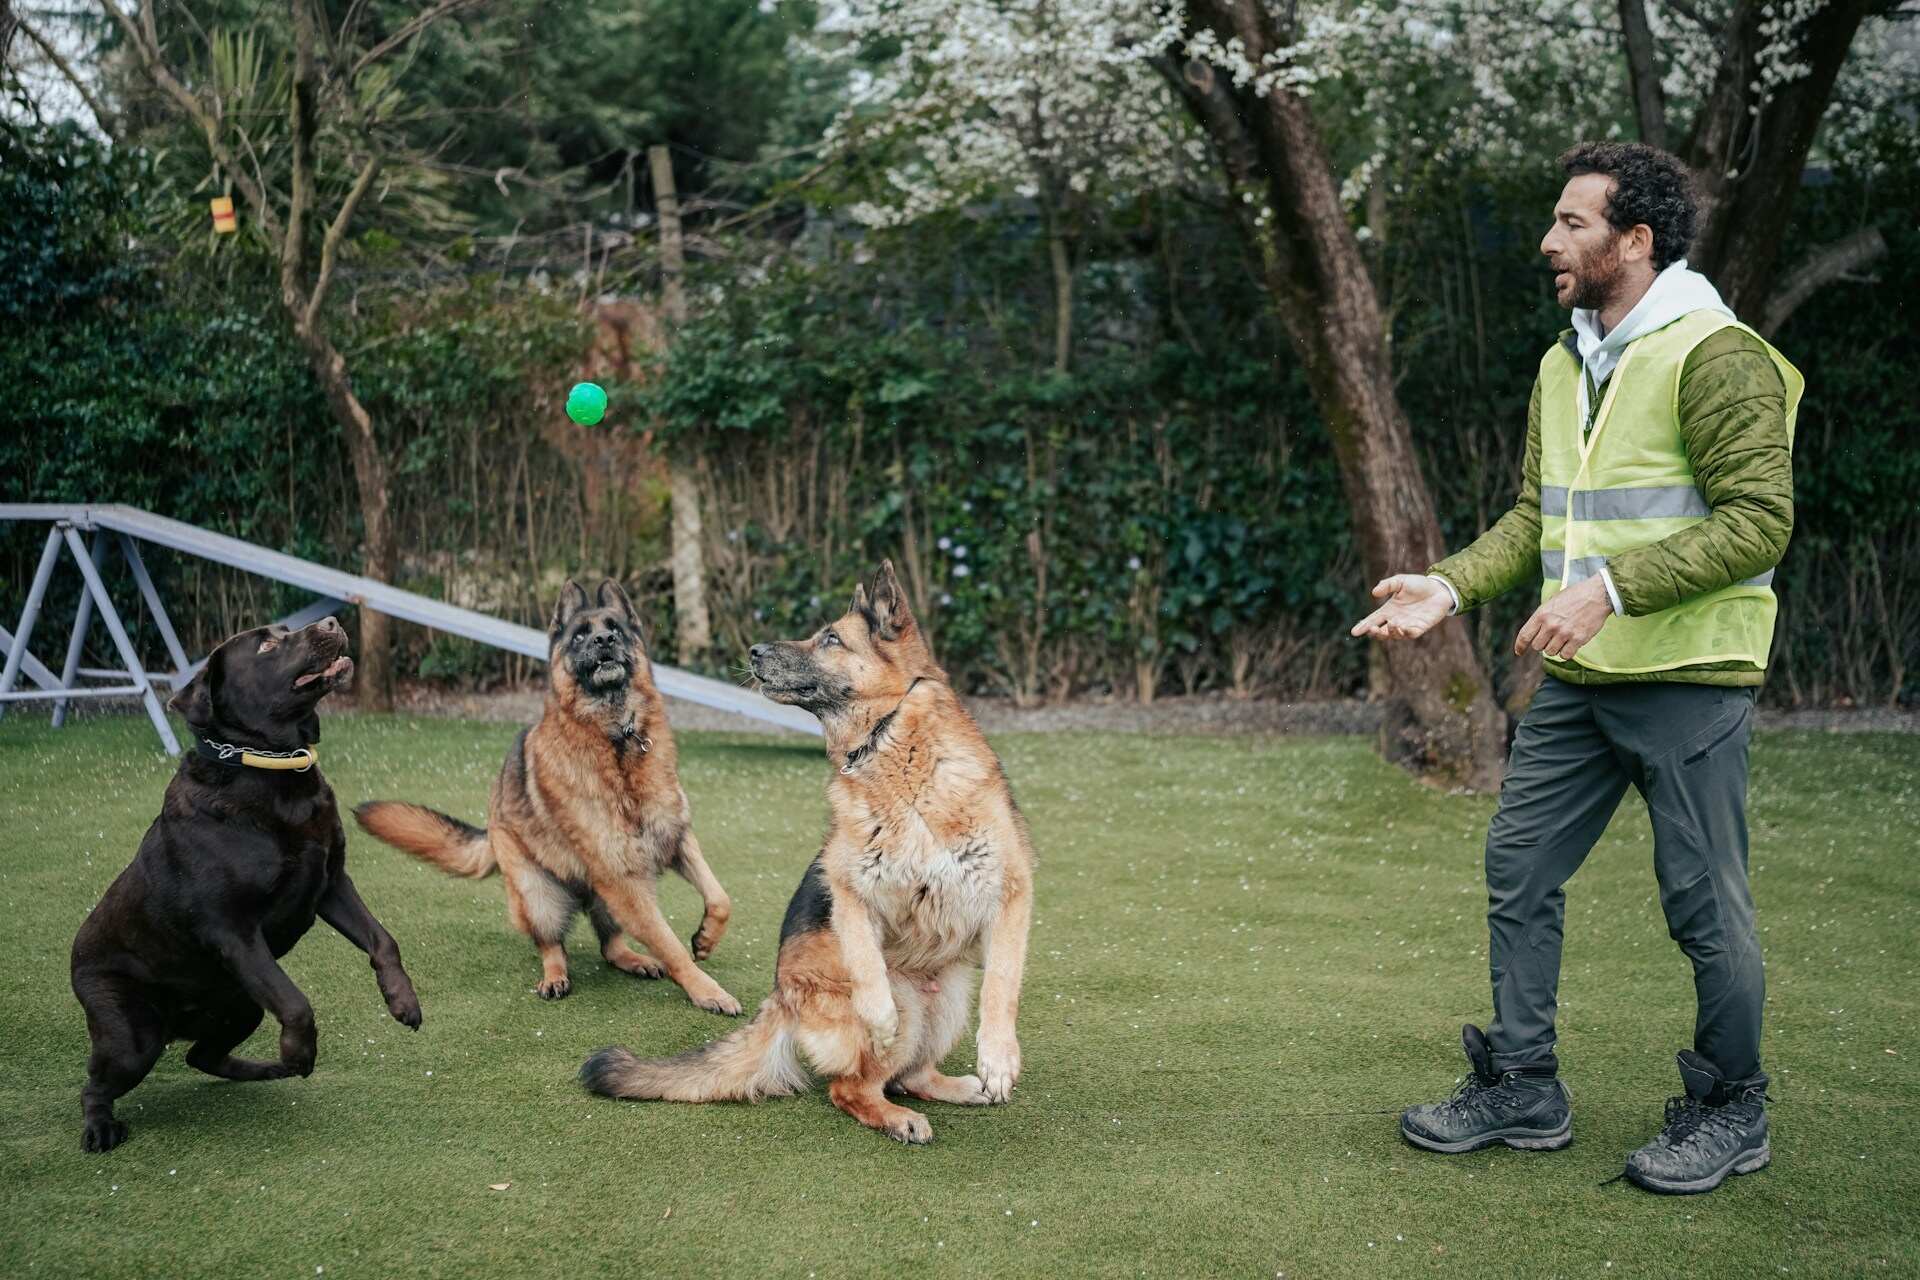 A man tossing a green ball to three large dogs in a garden